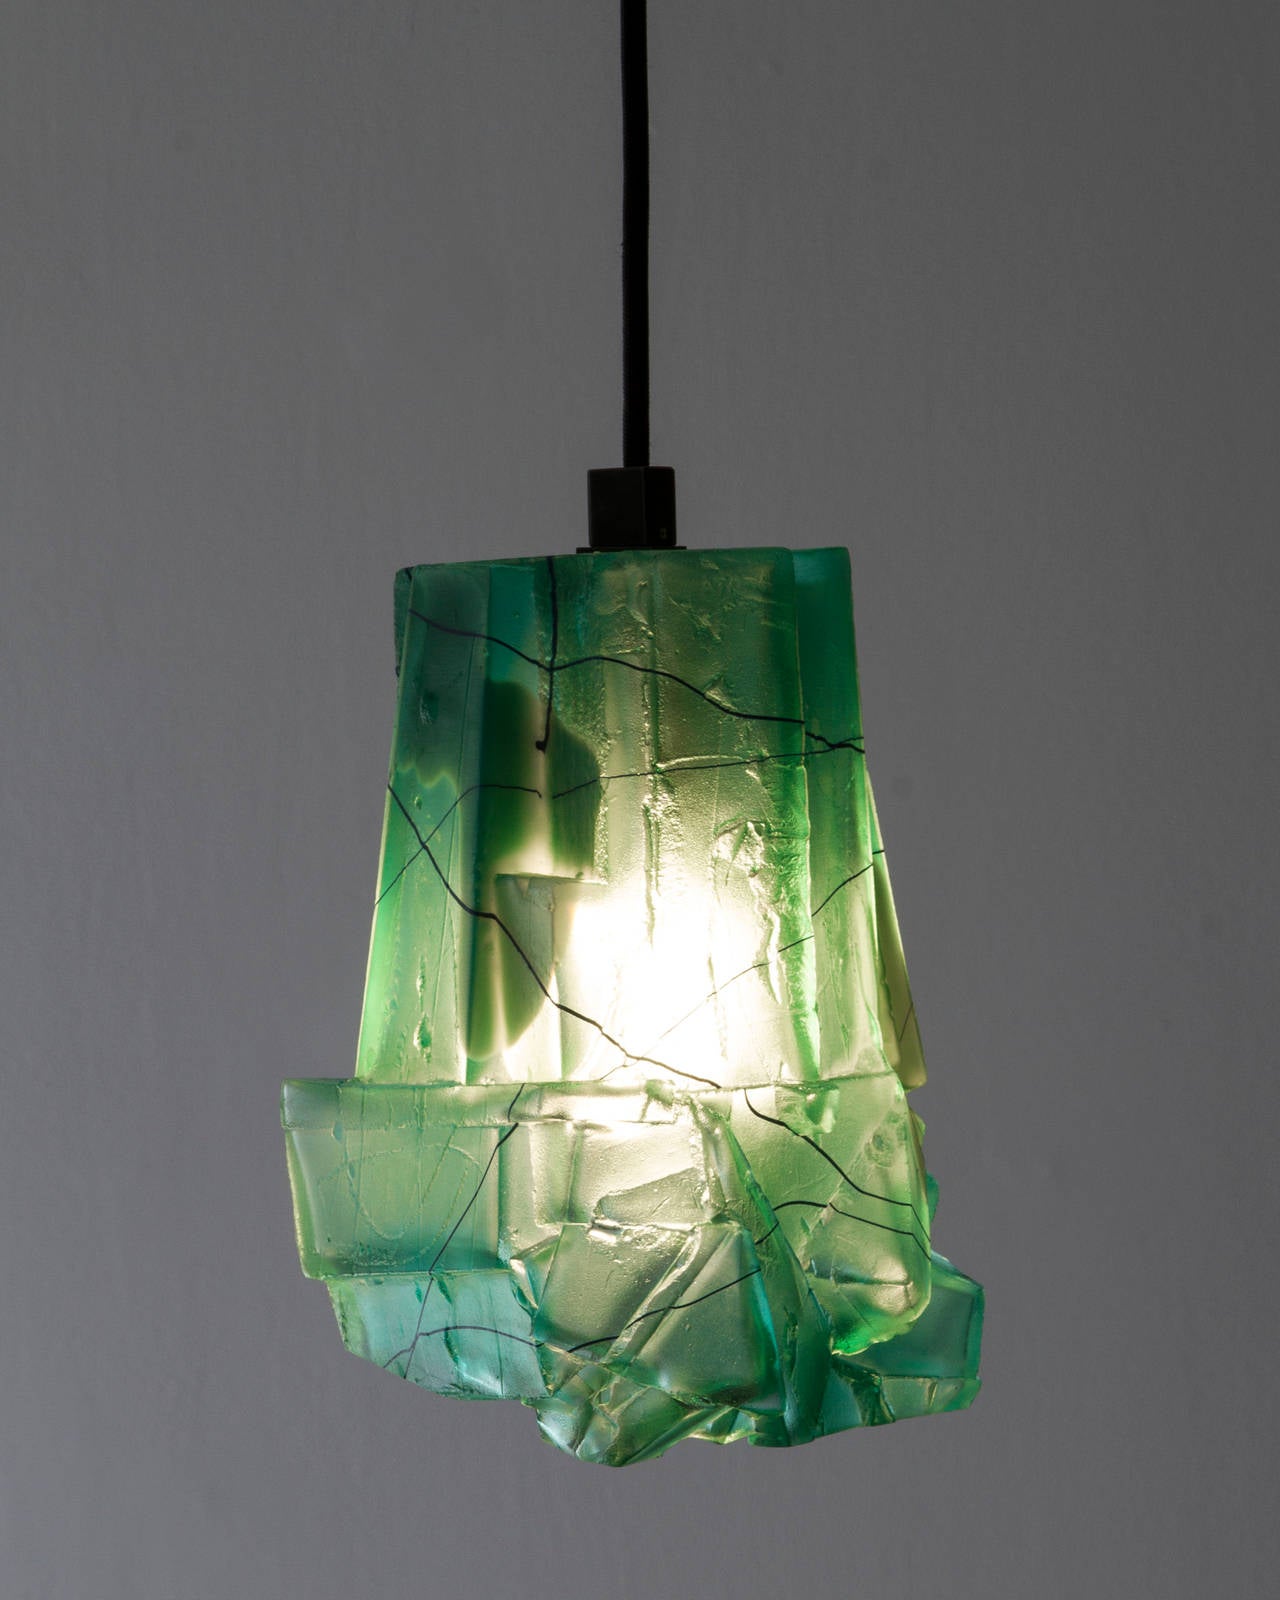 Unique Assemblage pendant lamp in teal hand-blown, cut and polished glass. Designed and made by Thaddeus Wolfe, USA, 2014.